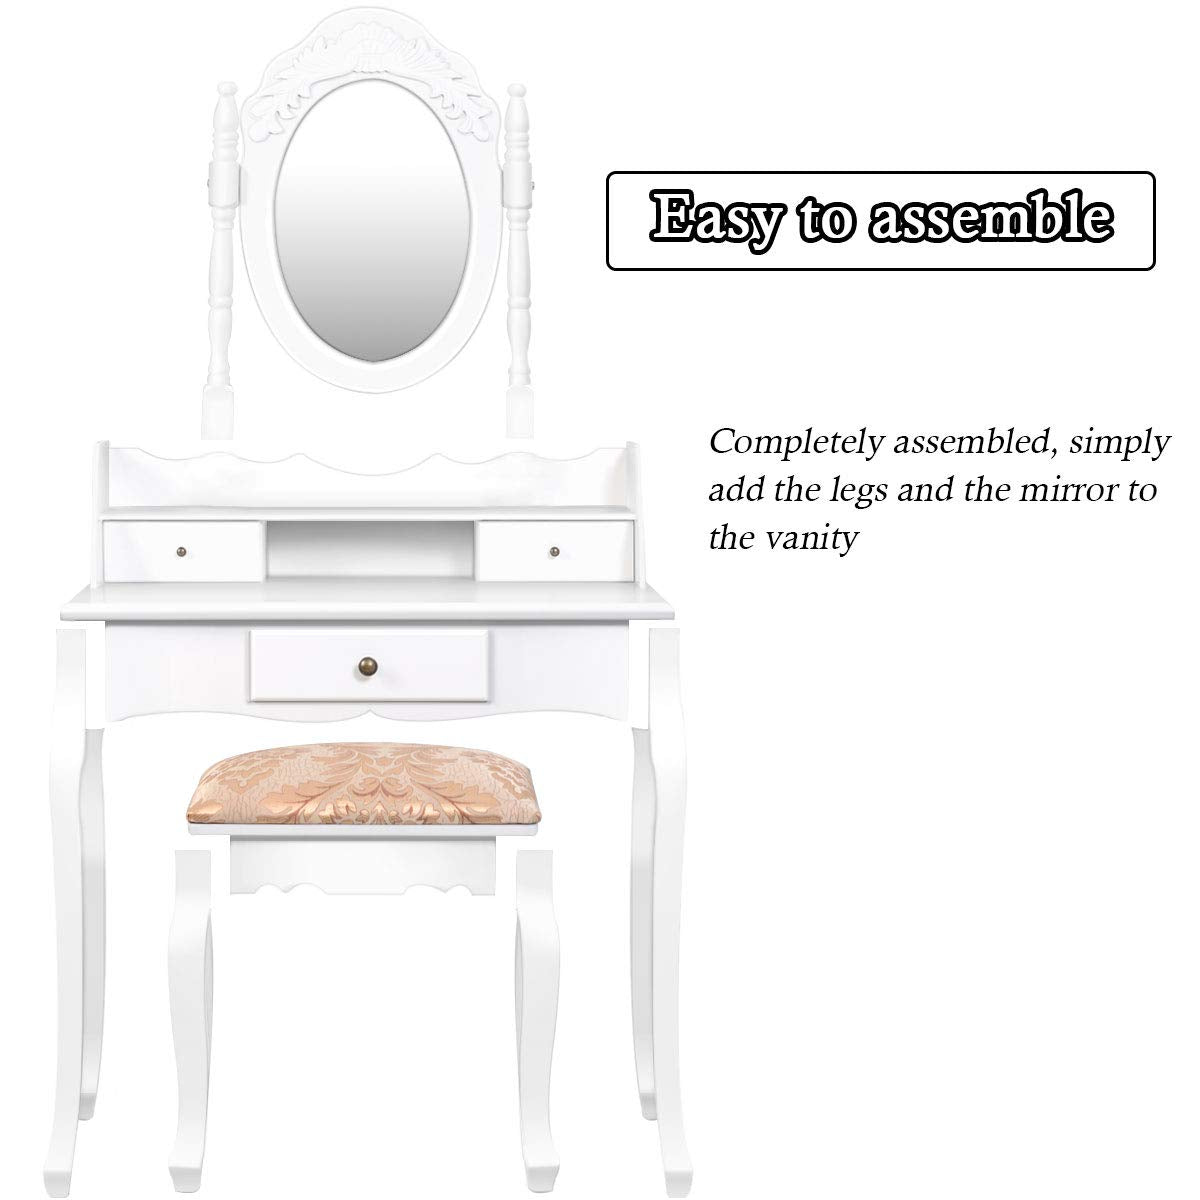 Giantex Bedroom Bathroom Makeup Table with Rotatable Mirror for Girls Women (White)